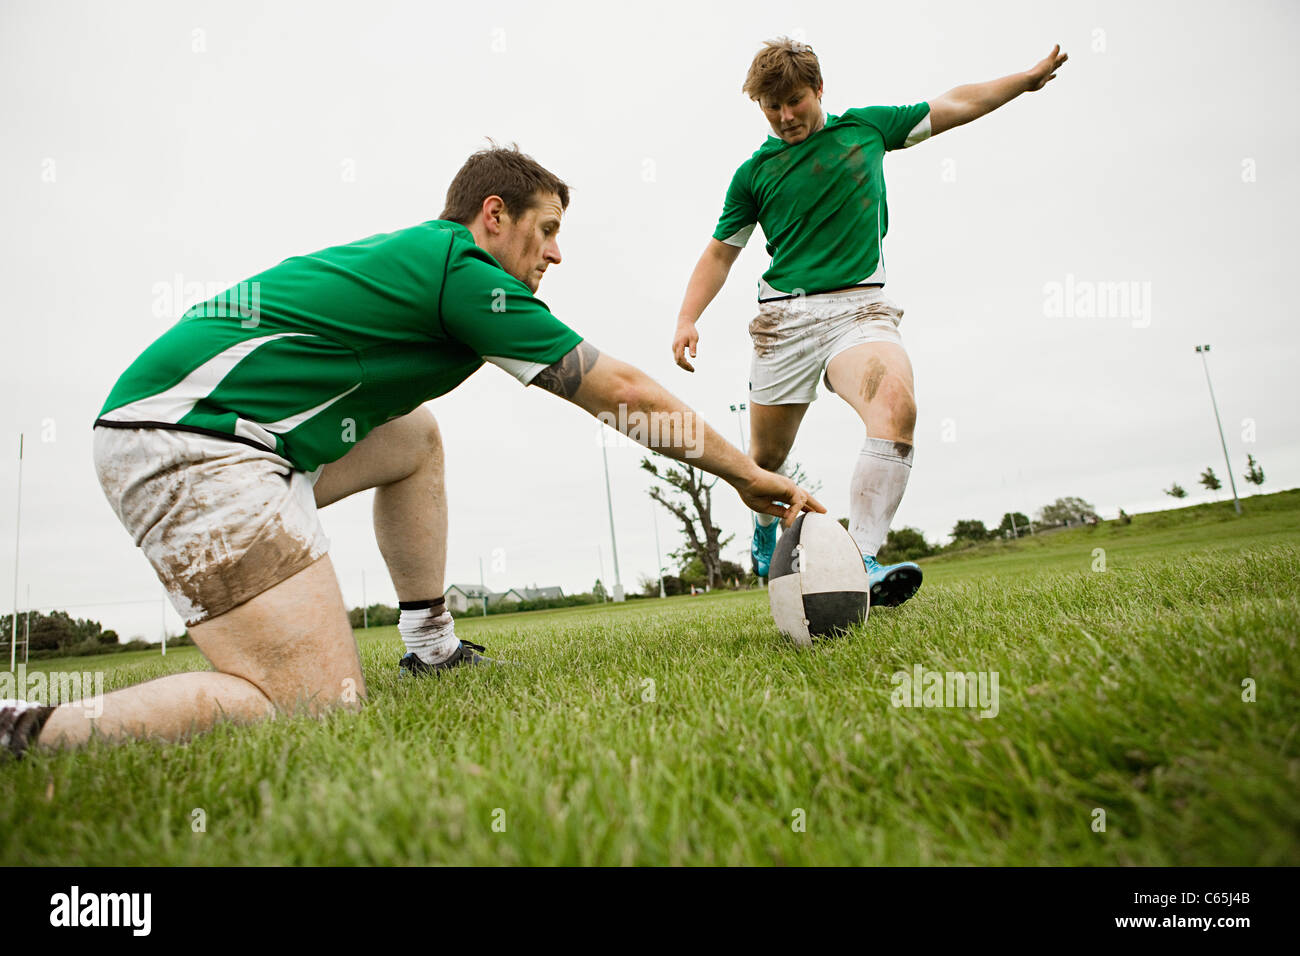 Rugby player kicking ball Banque D'Images